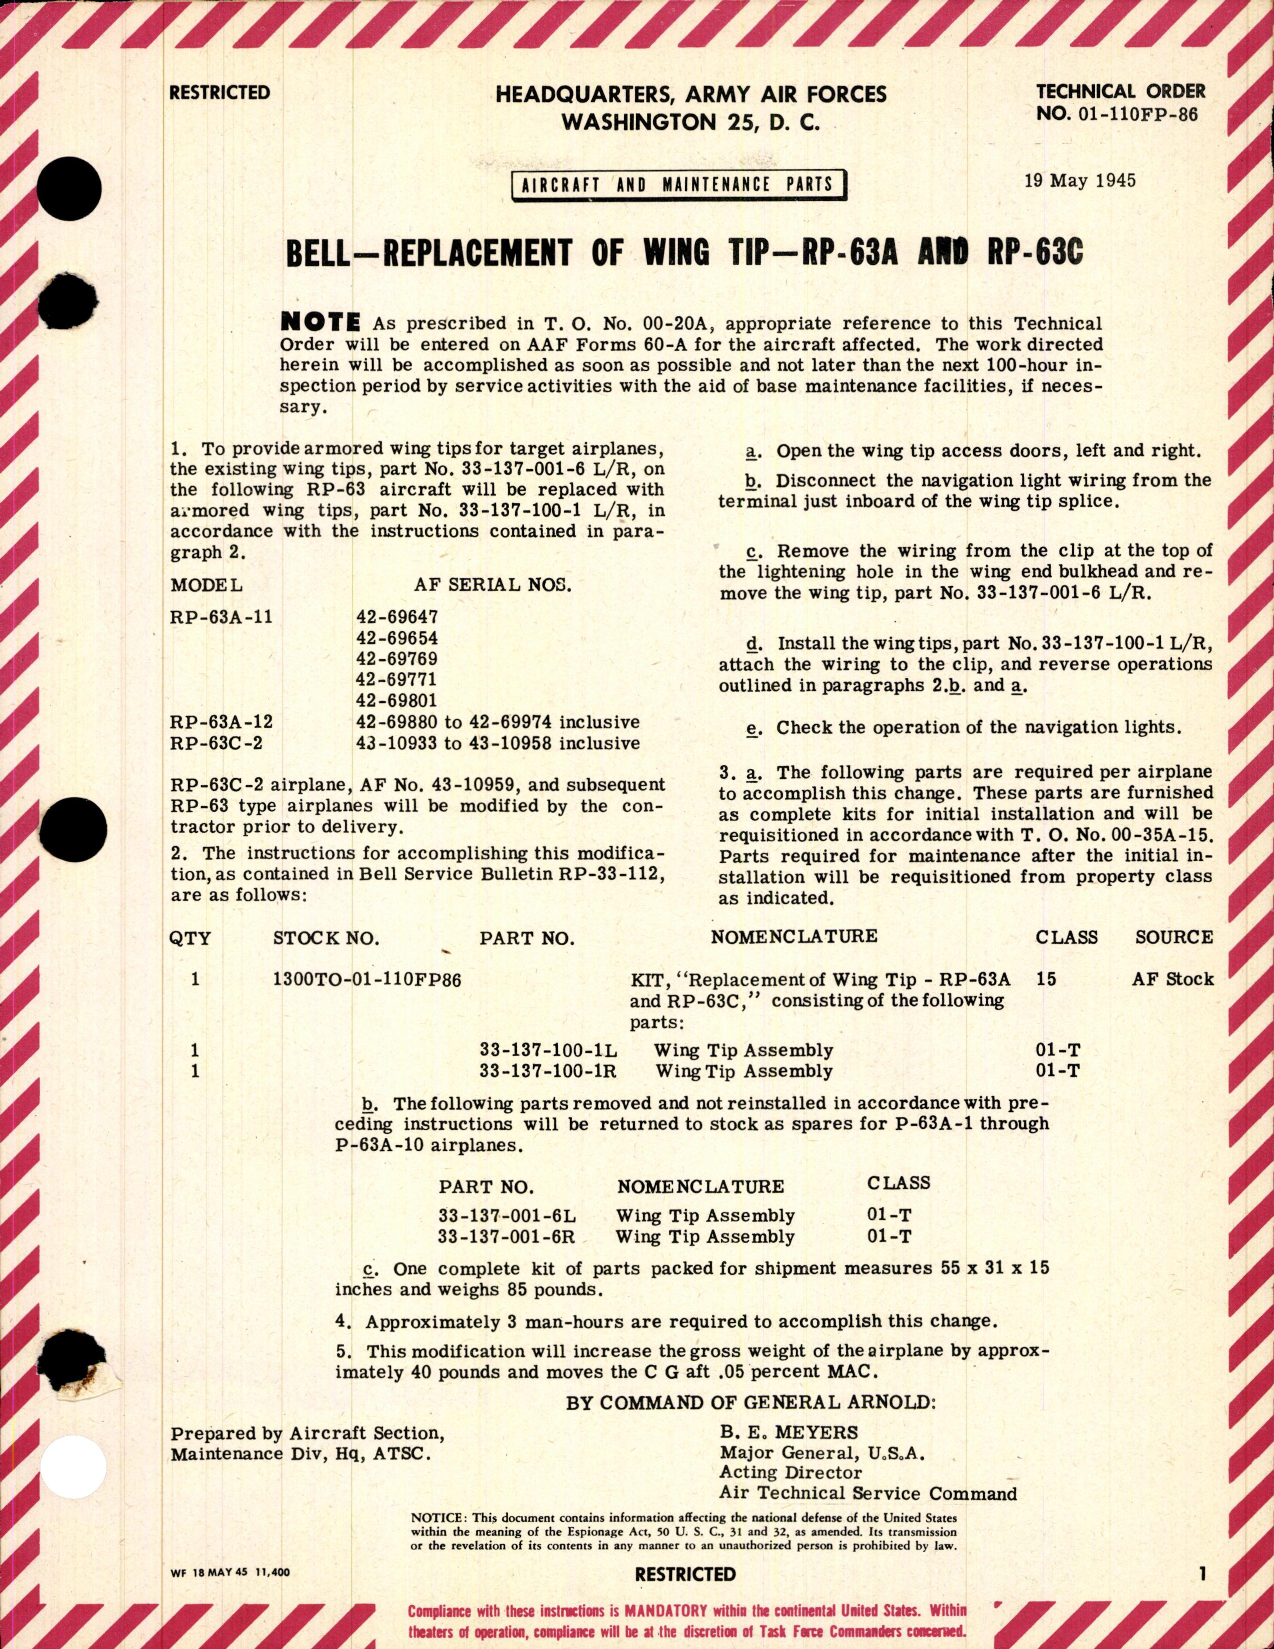 Sample page 1 from AirCorps Library document: Replacement of Wing Tip for RP-63A and C